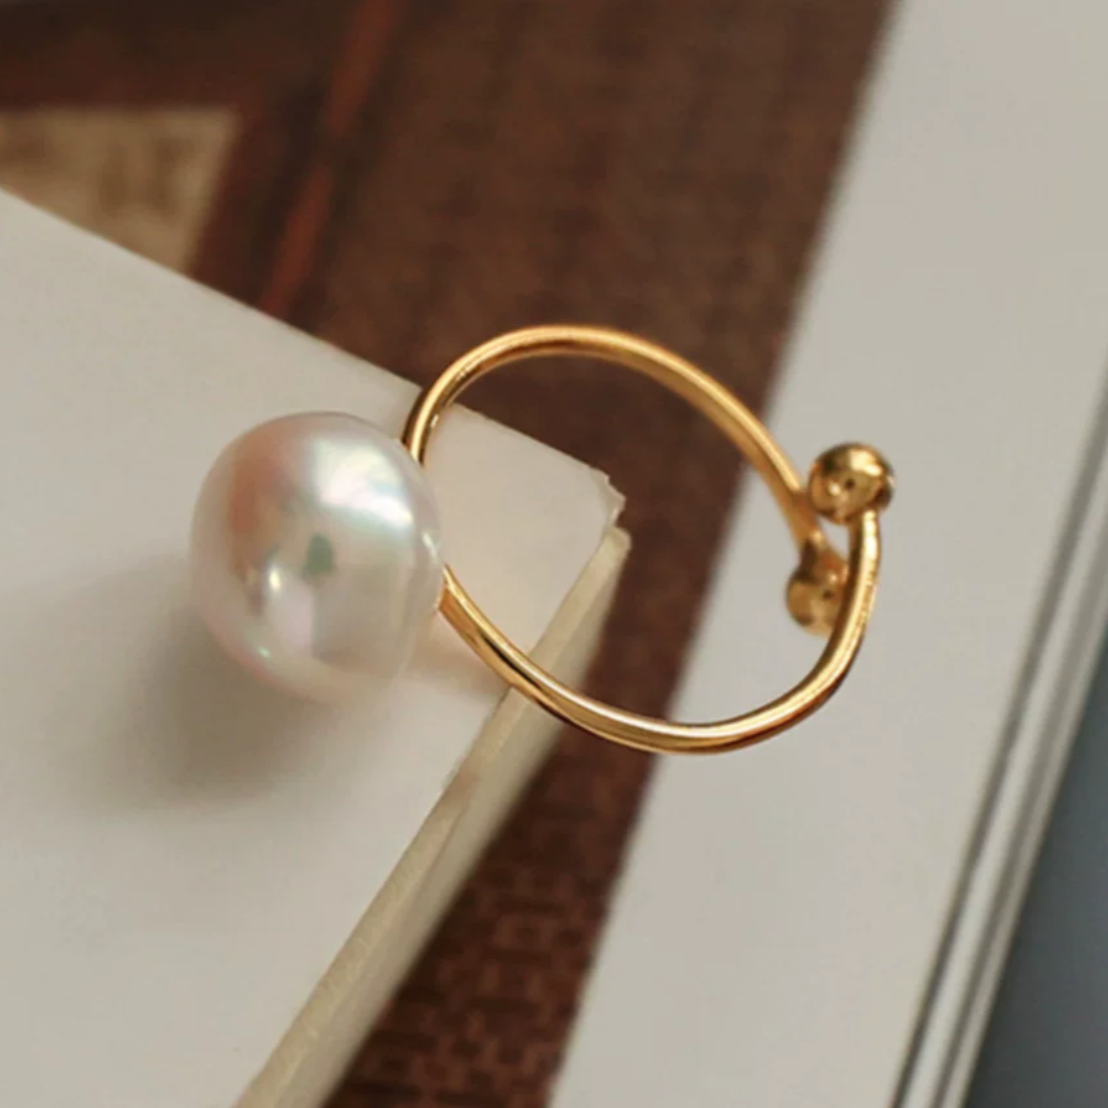 Vintage-Inspired Adjustable Faux Pearl Ring